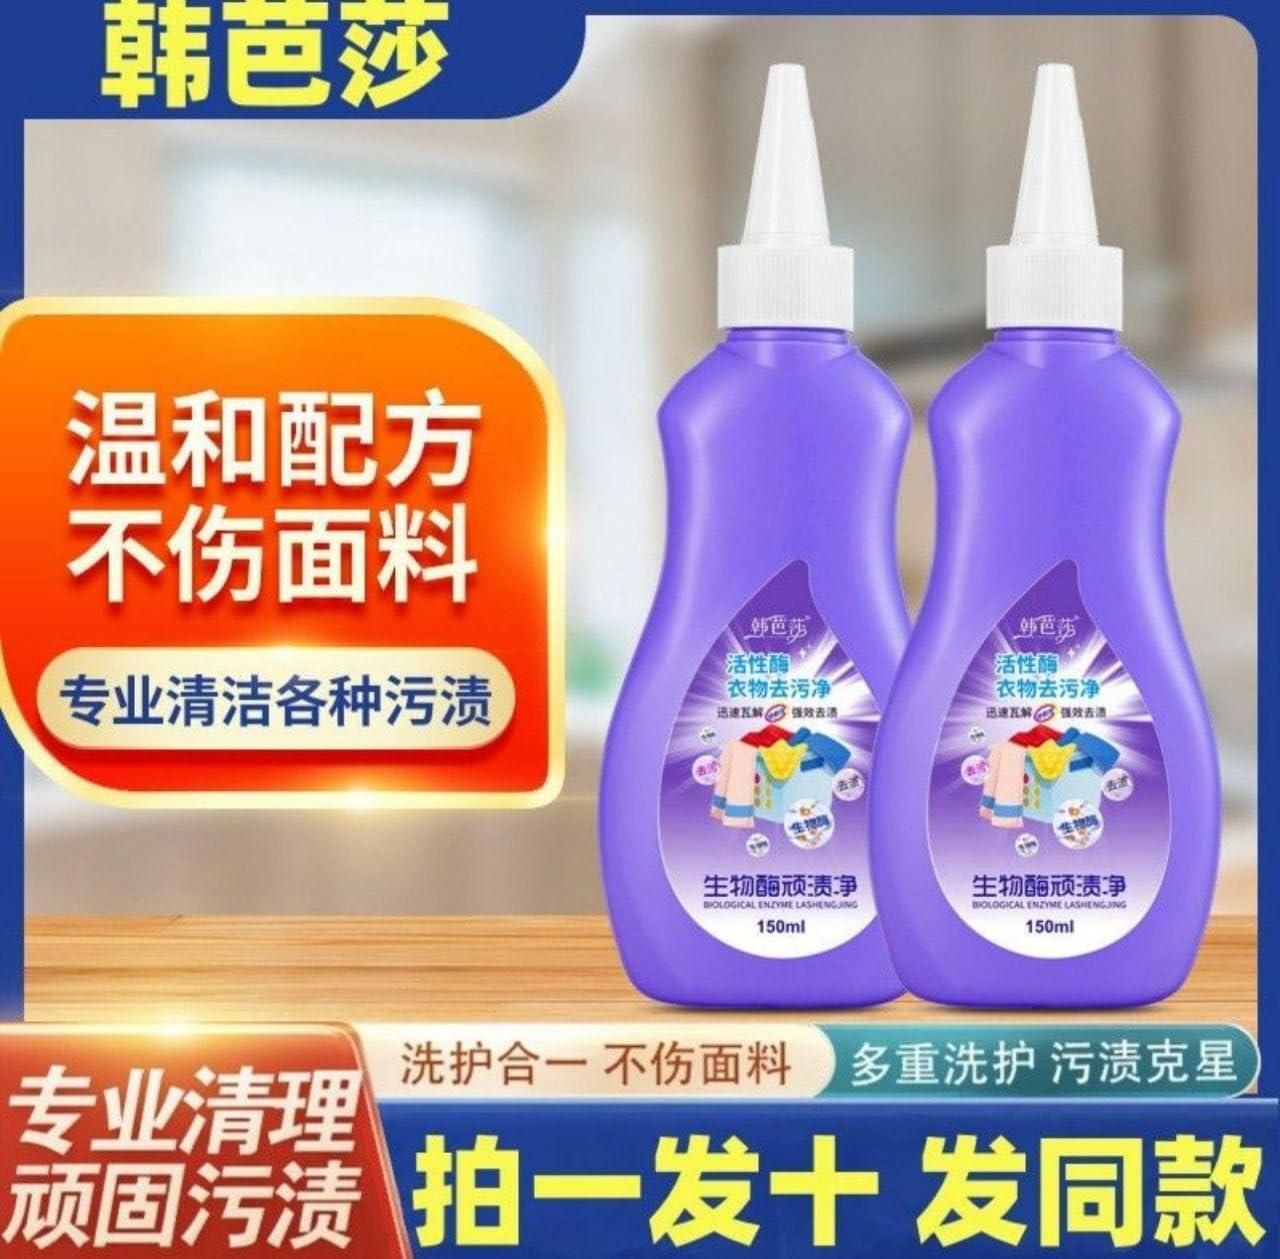 All Color Stain Remover for Clothes Multi-Purpose Roll Bead Fabric Clothes Stain Remover